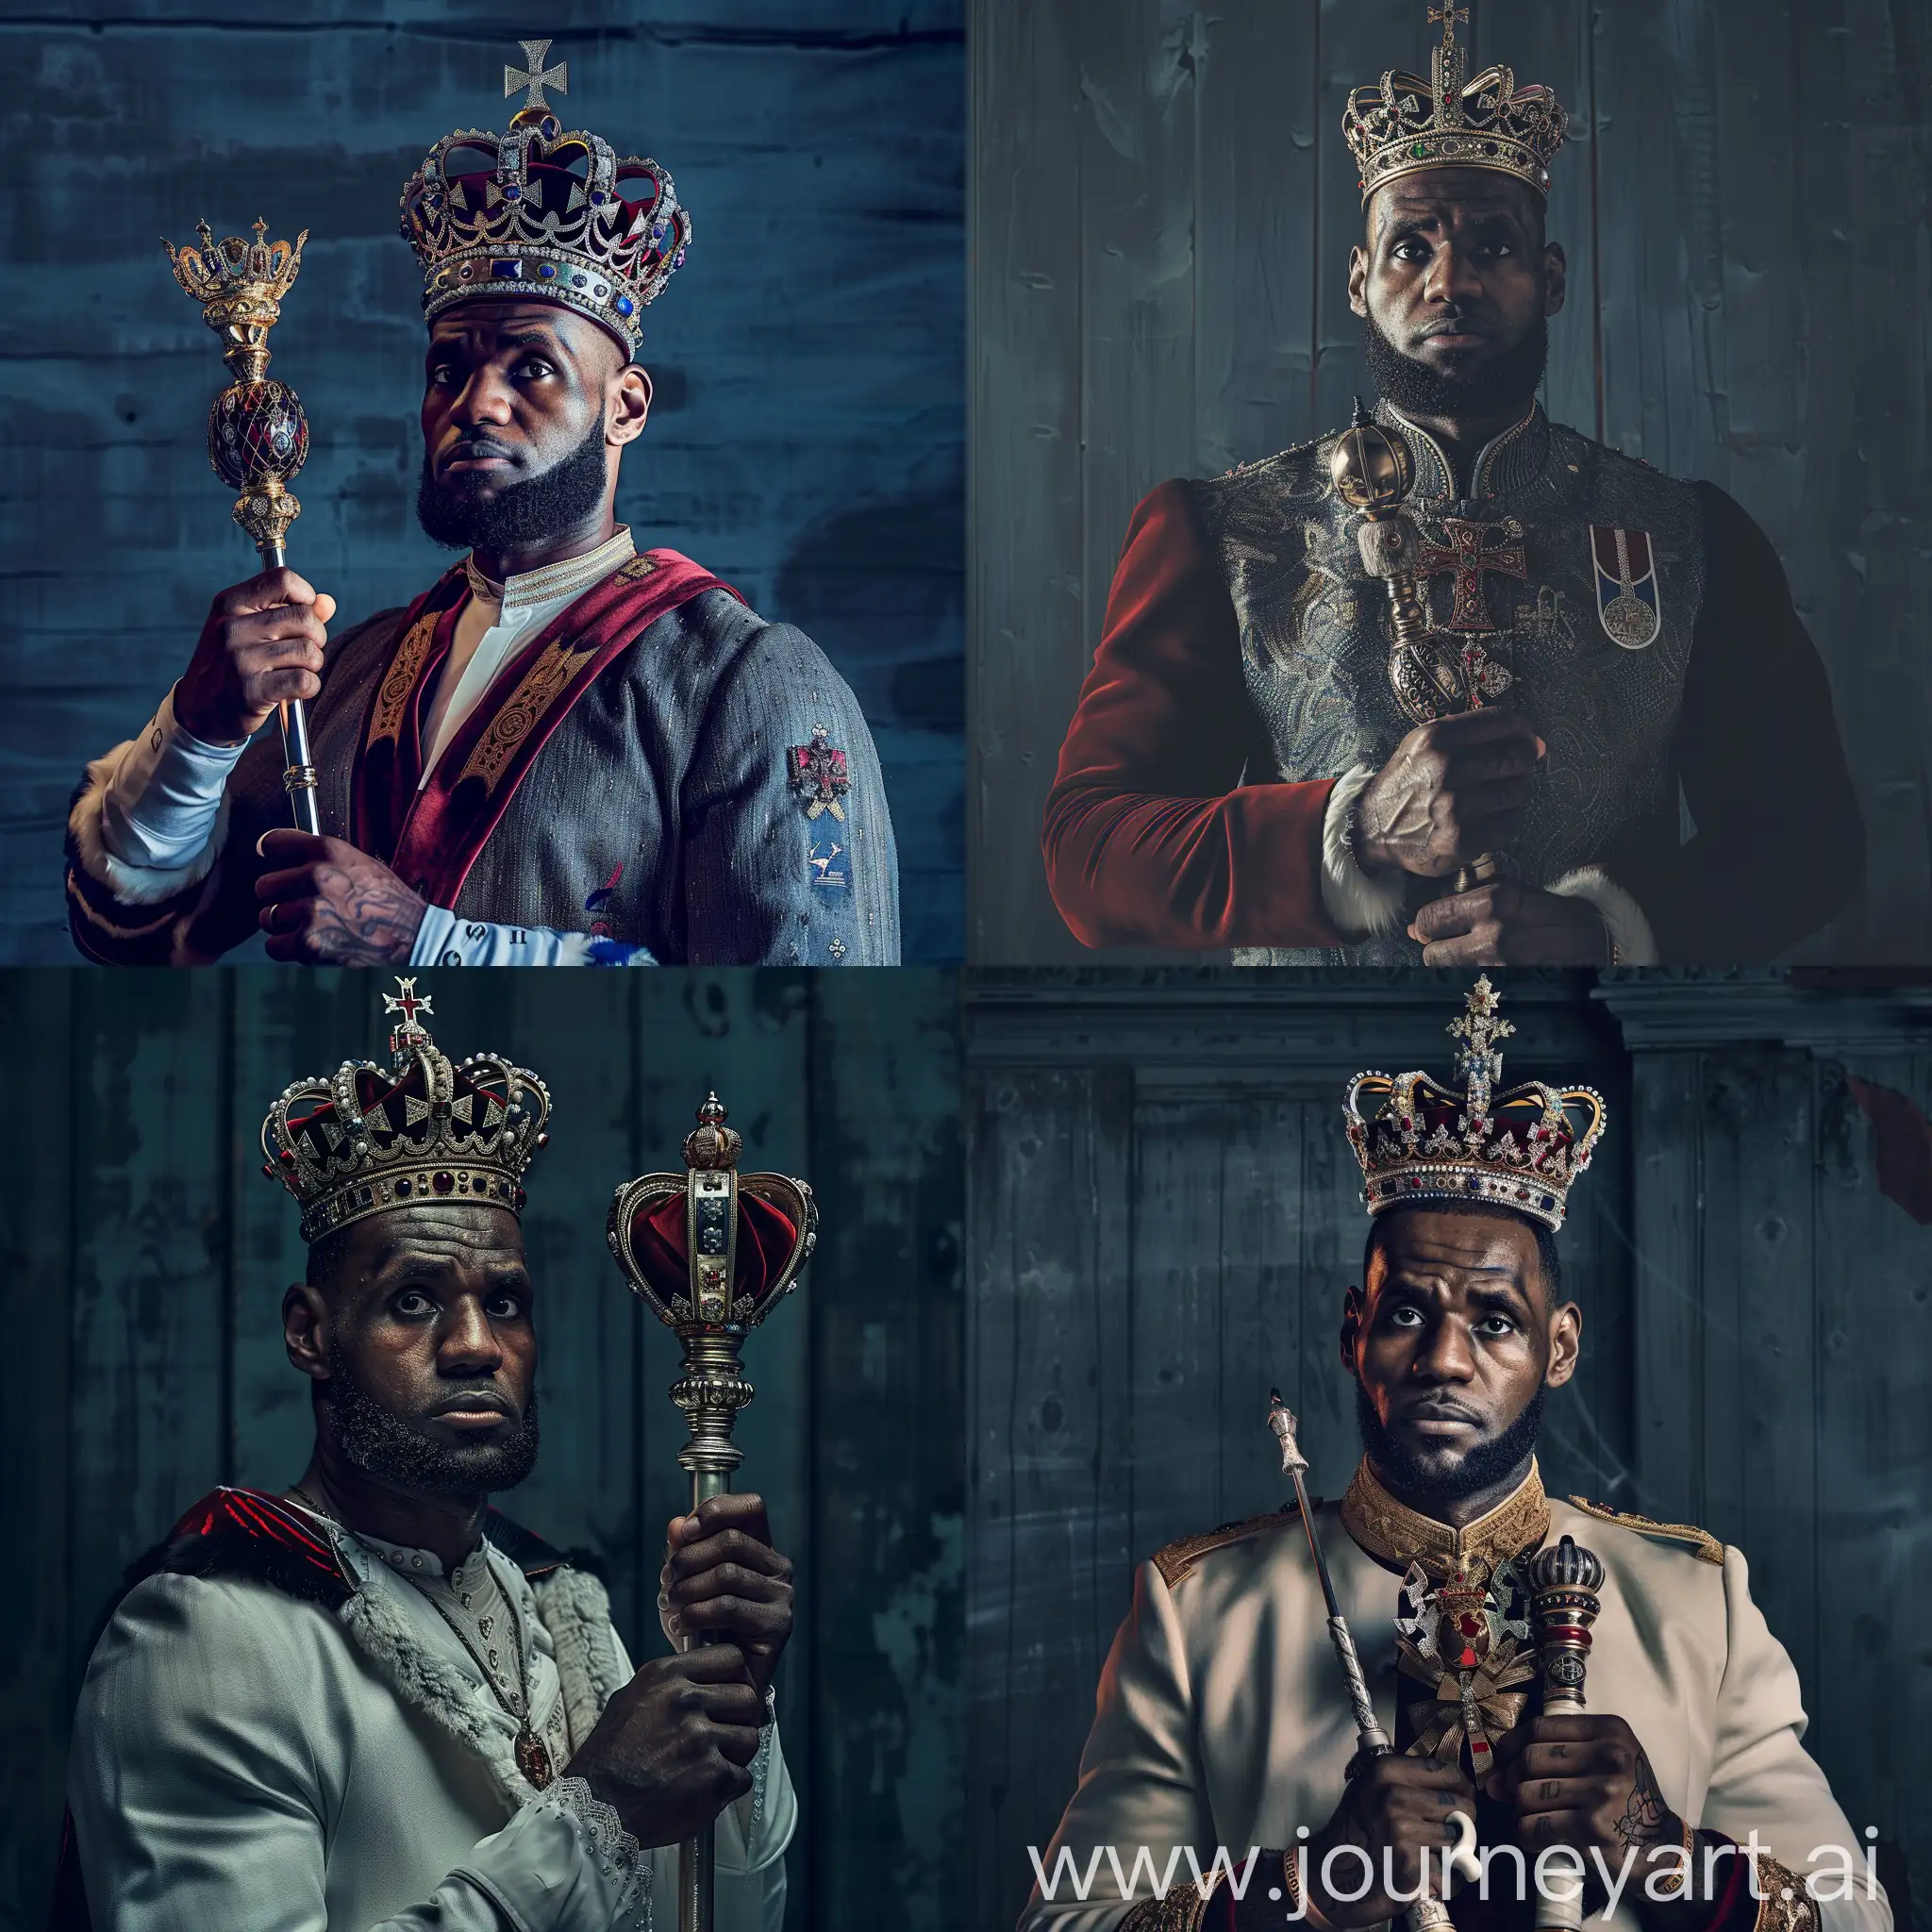 Lebron James is wearing a British crown and holding a scepter. Behind him is a dark blue wall. Portrait mode --v 6 --ar 1:1 --no 69945